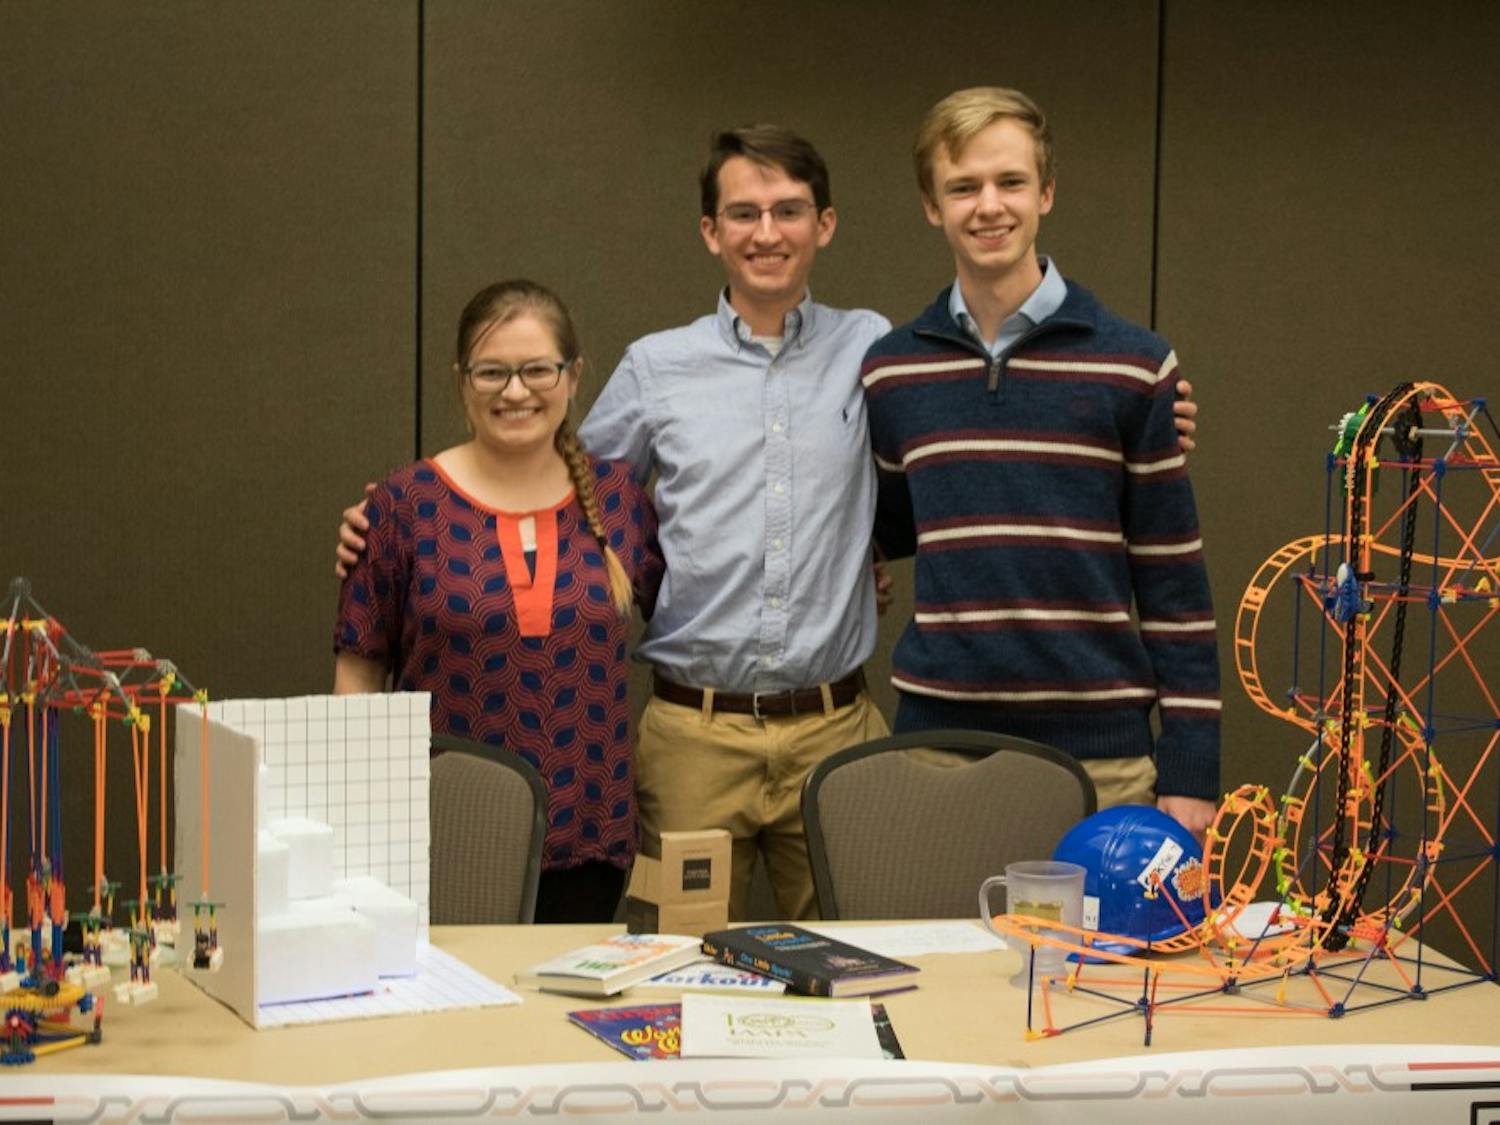 Katie Bowman, Seth Harris, and Gavin Prather represent&nbsp;the Theme Park Engineering Group&nbsp;at the Organization Showcase in the Student Center Ballroom on Tuesday, March 20, 2018 in Auburn, Ala.&nbsp;